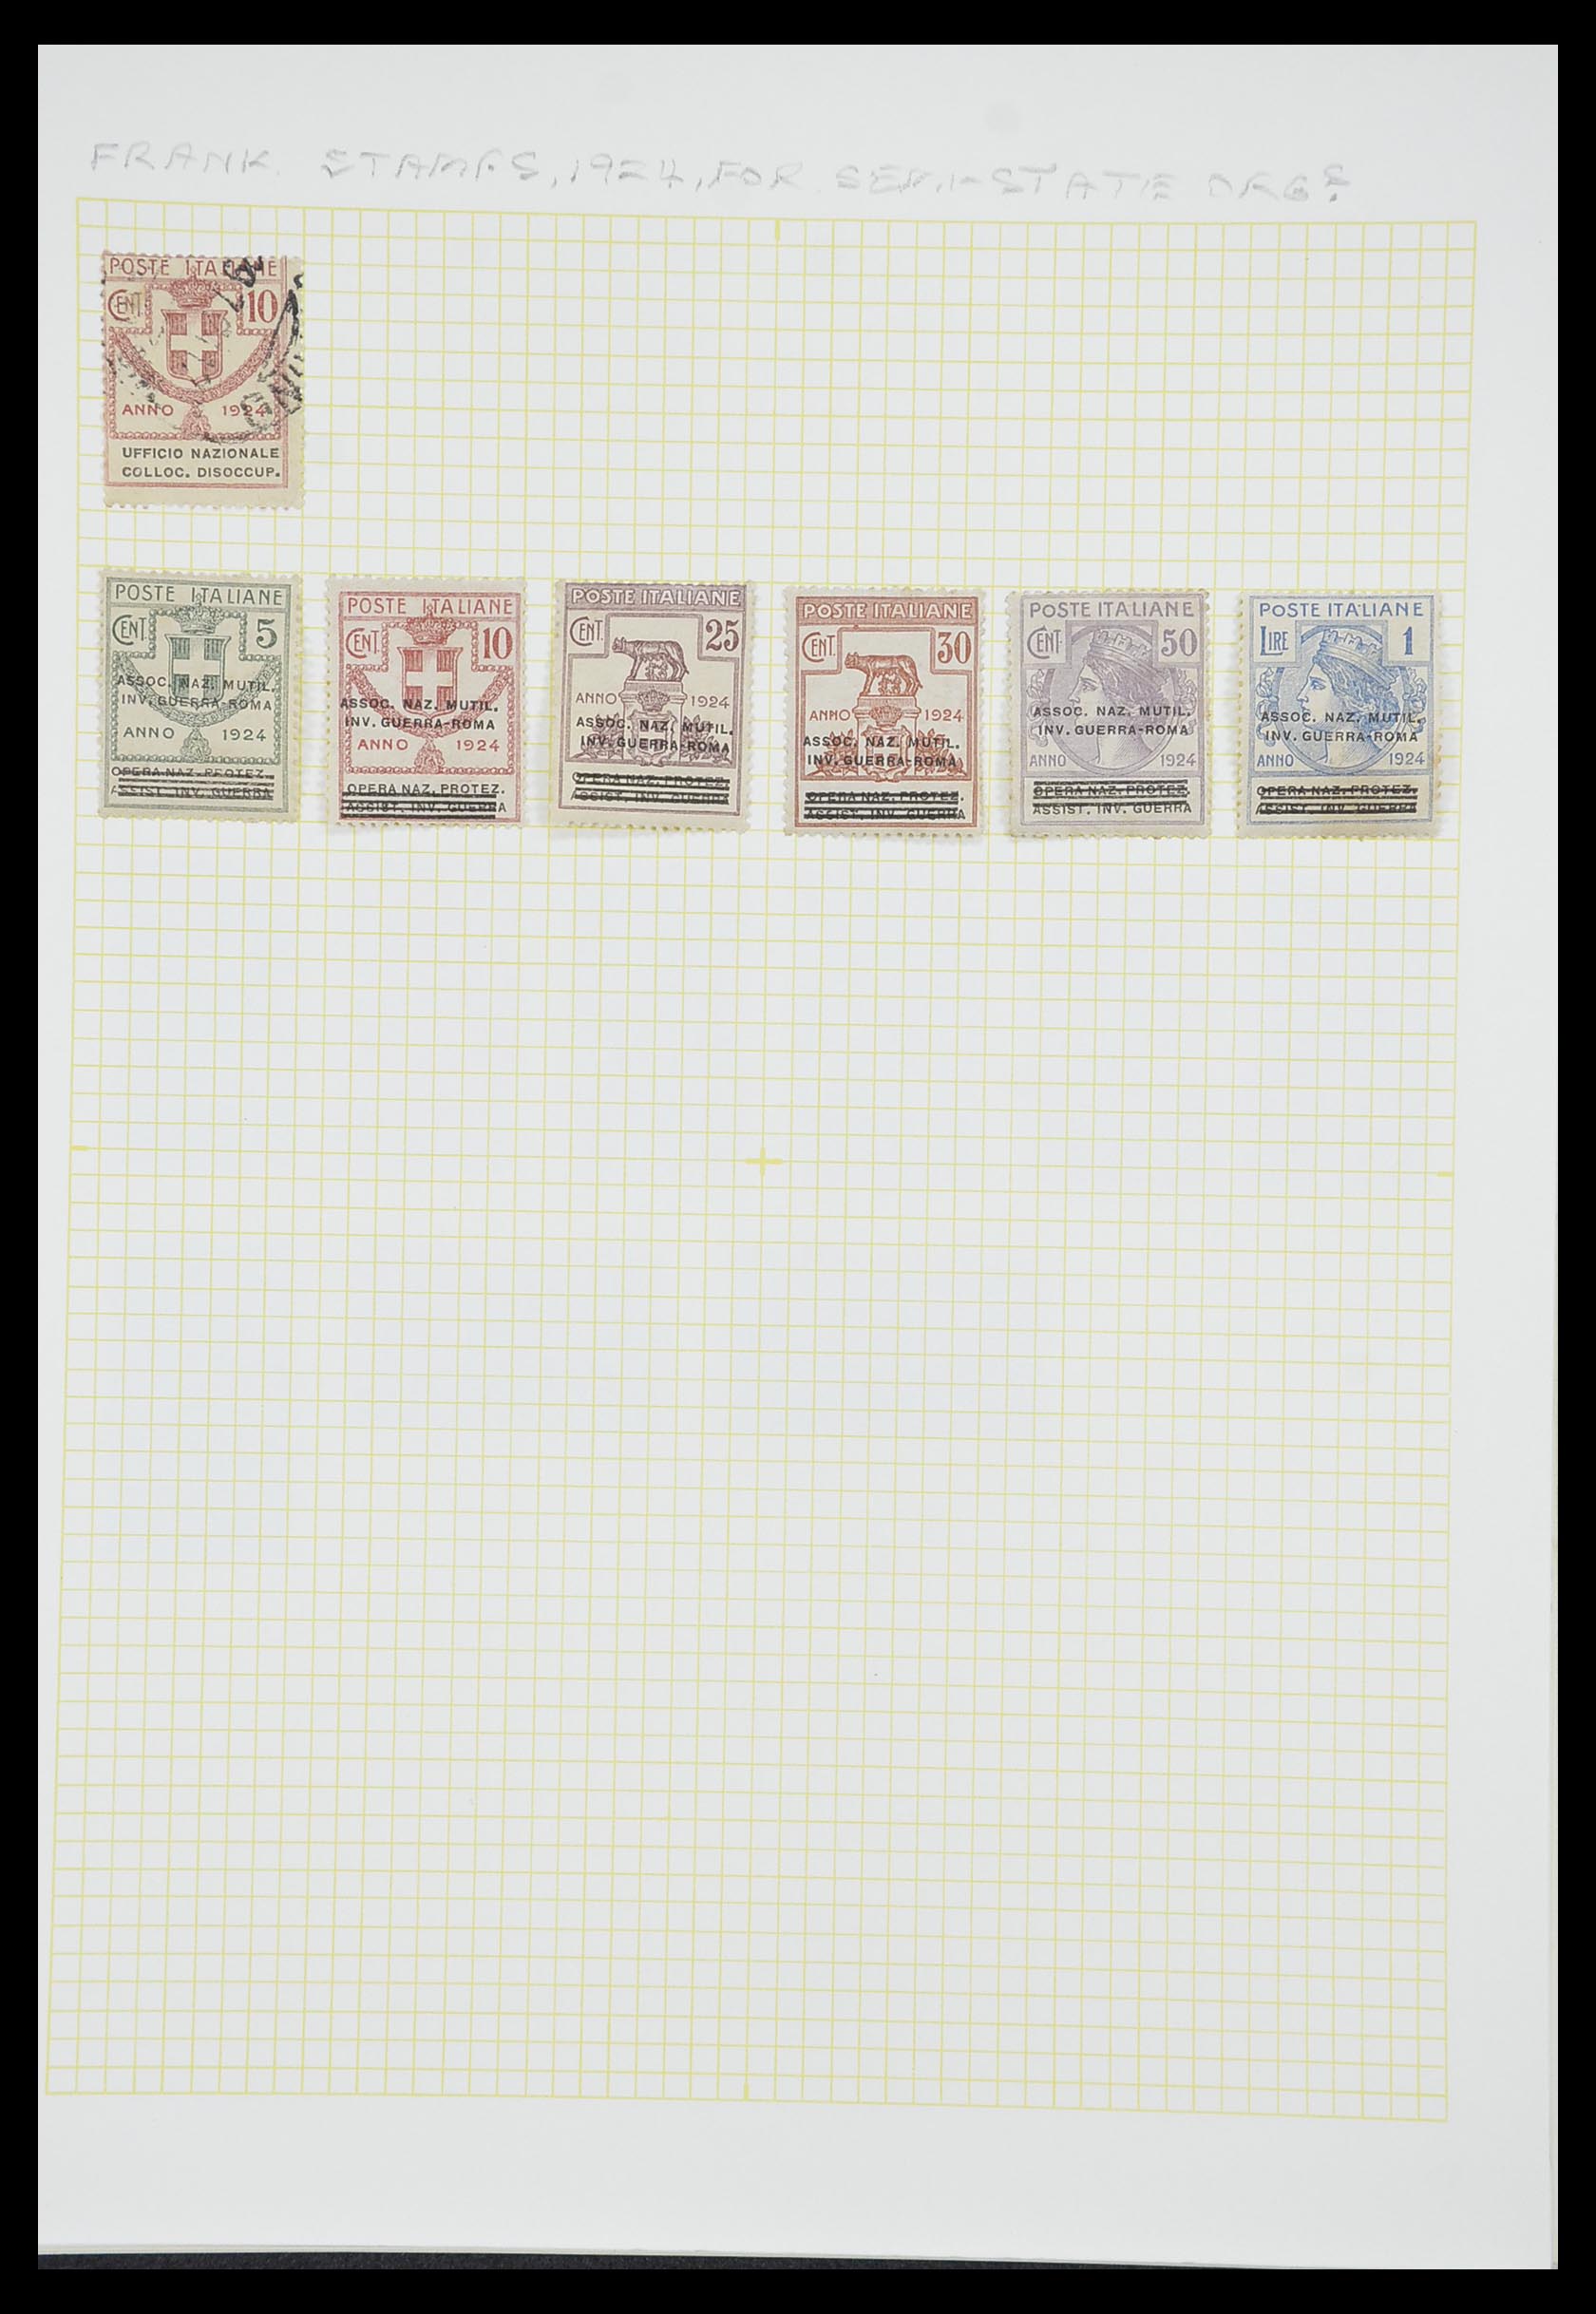 33428 338 - Stamp collection 33428 Italy and States 1850-2005.